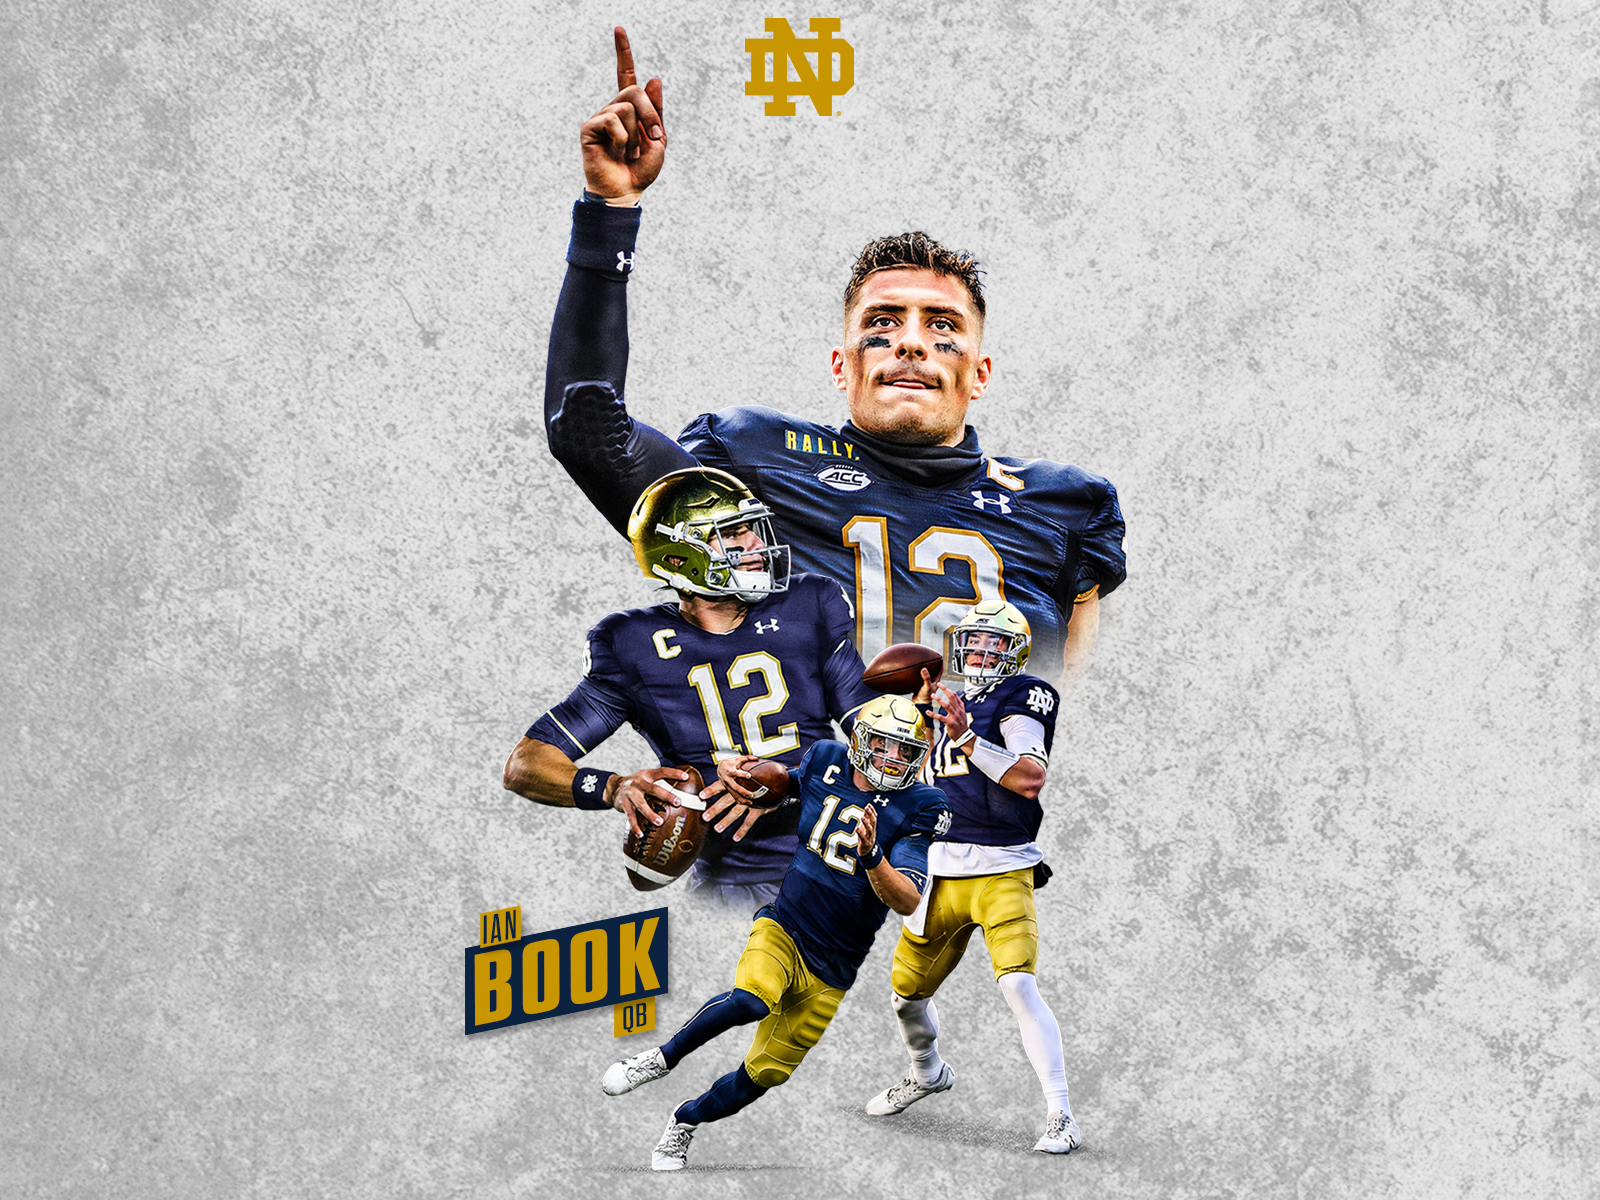 Notre Dame tunnel wallpaper by TylerH516  Download on ZEDGE  a4e8